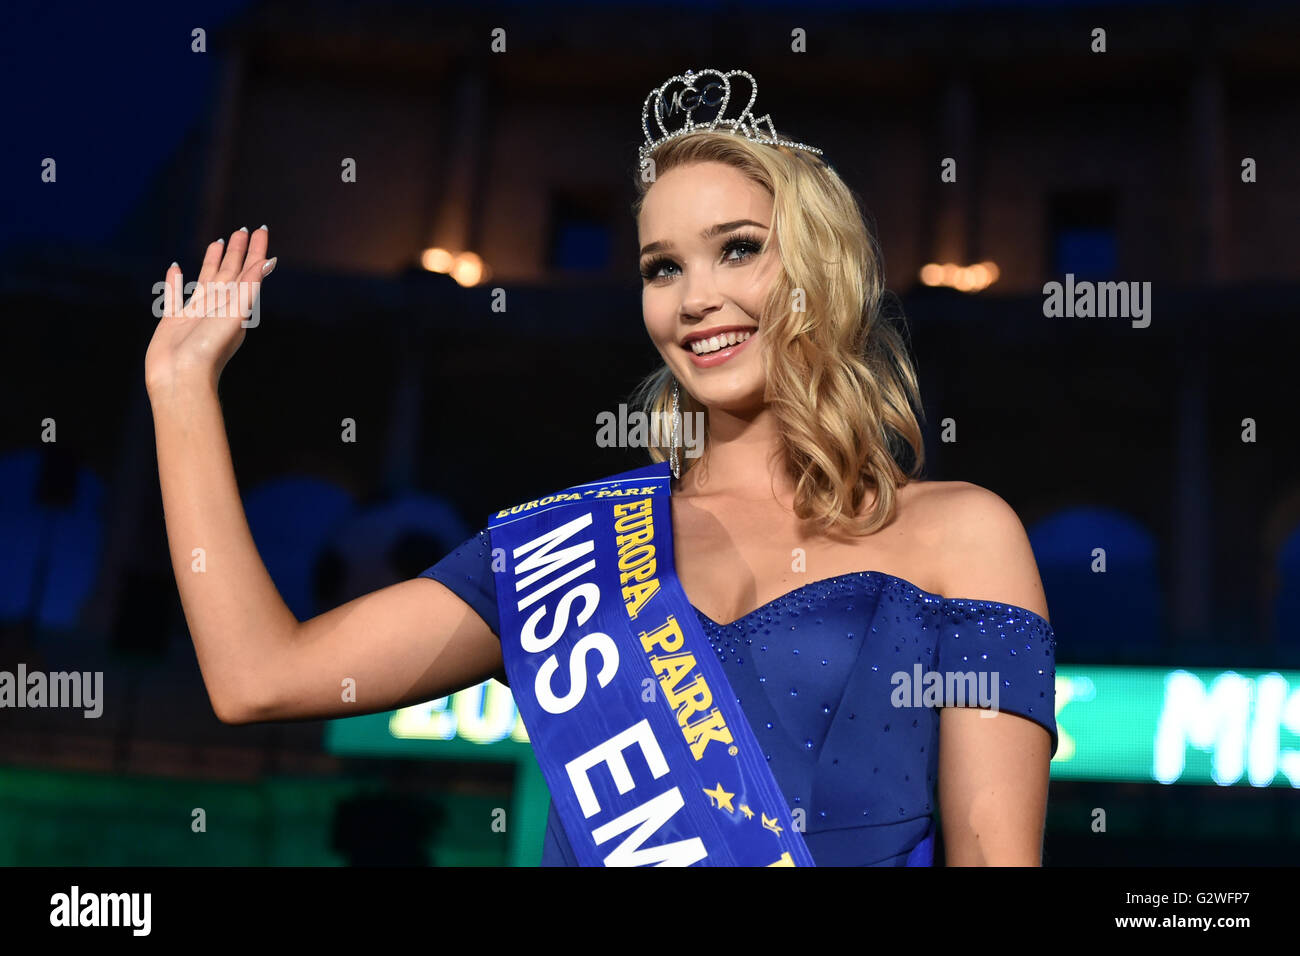 Rust, Germany. 03rd June, 2016. Arna Yr Jonsdottir from Iceland, winner of the 'Miss EM 2016' (Miss Euro 2016) competition celebrates on stage in Rust, Germany, 03 June 2016. The competition included 24 representatives from each country competing in the upcoming UEFA Euro 2016. Photo: UWE ANSPACH/dpa/Alamy Live News Stock Photo